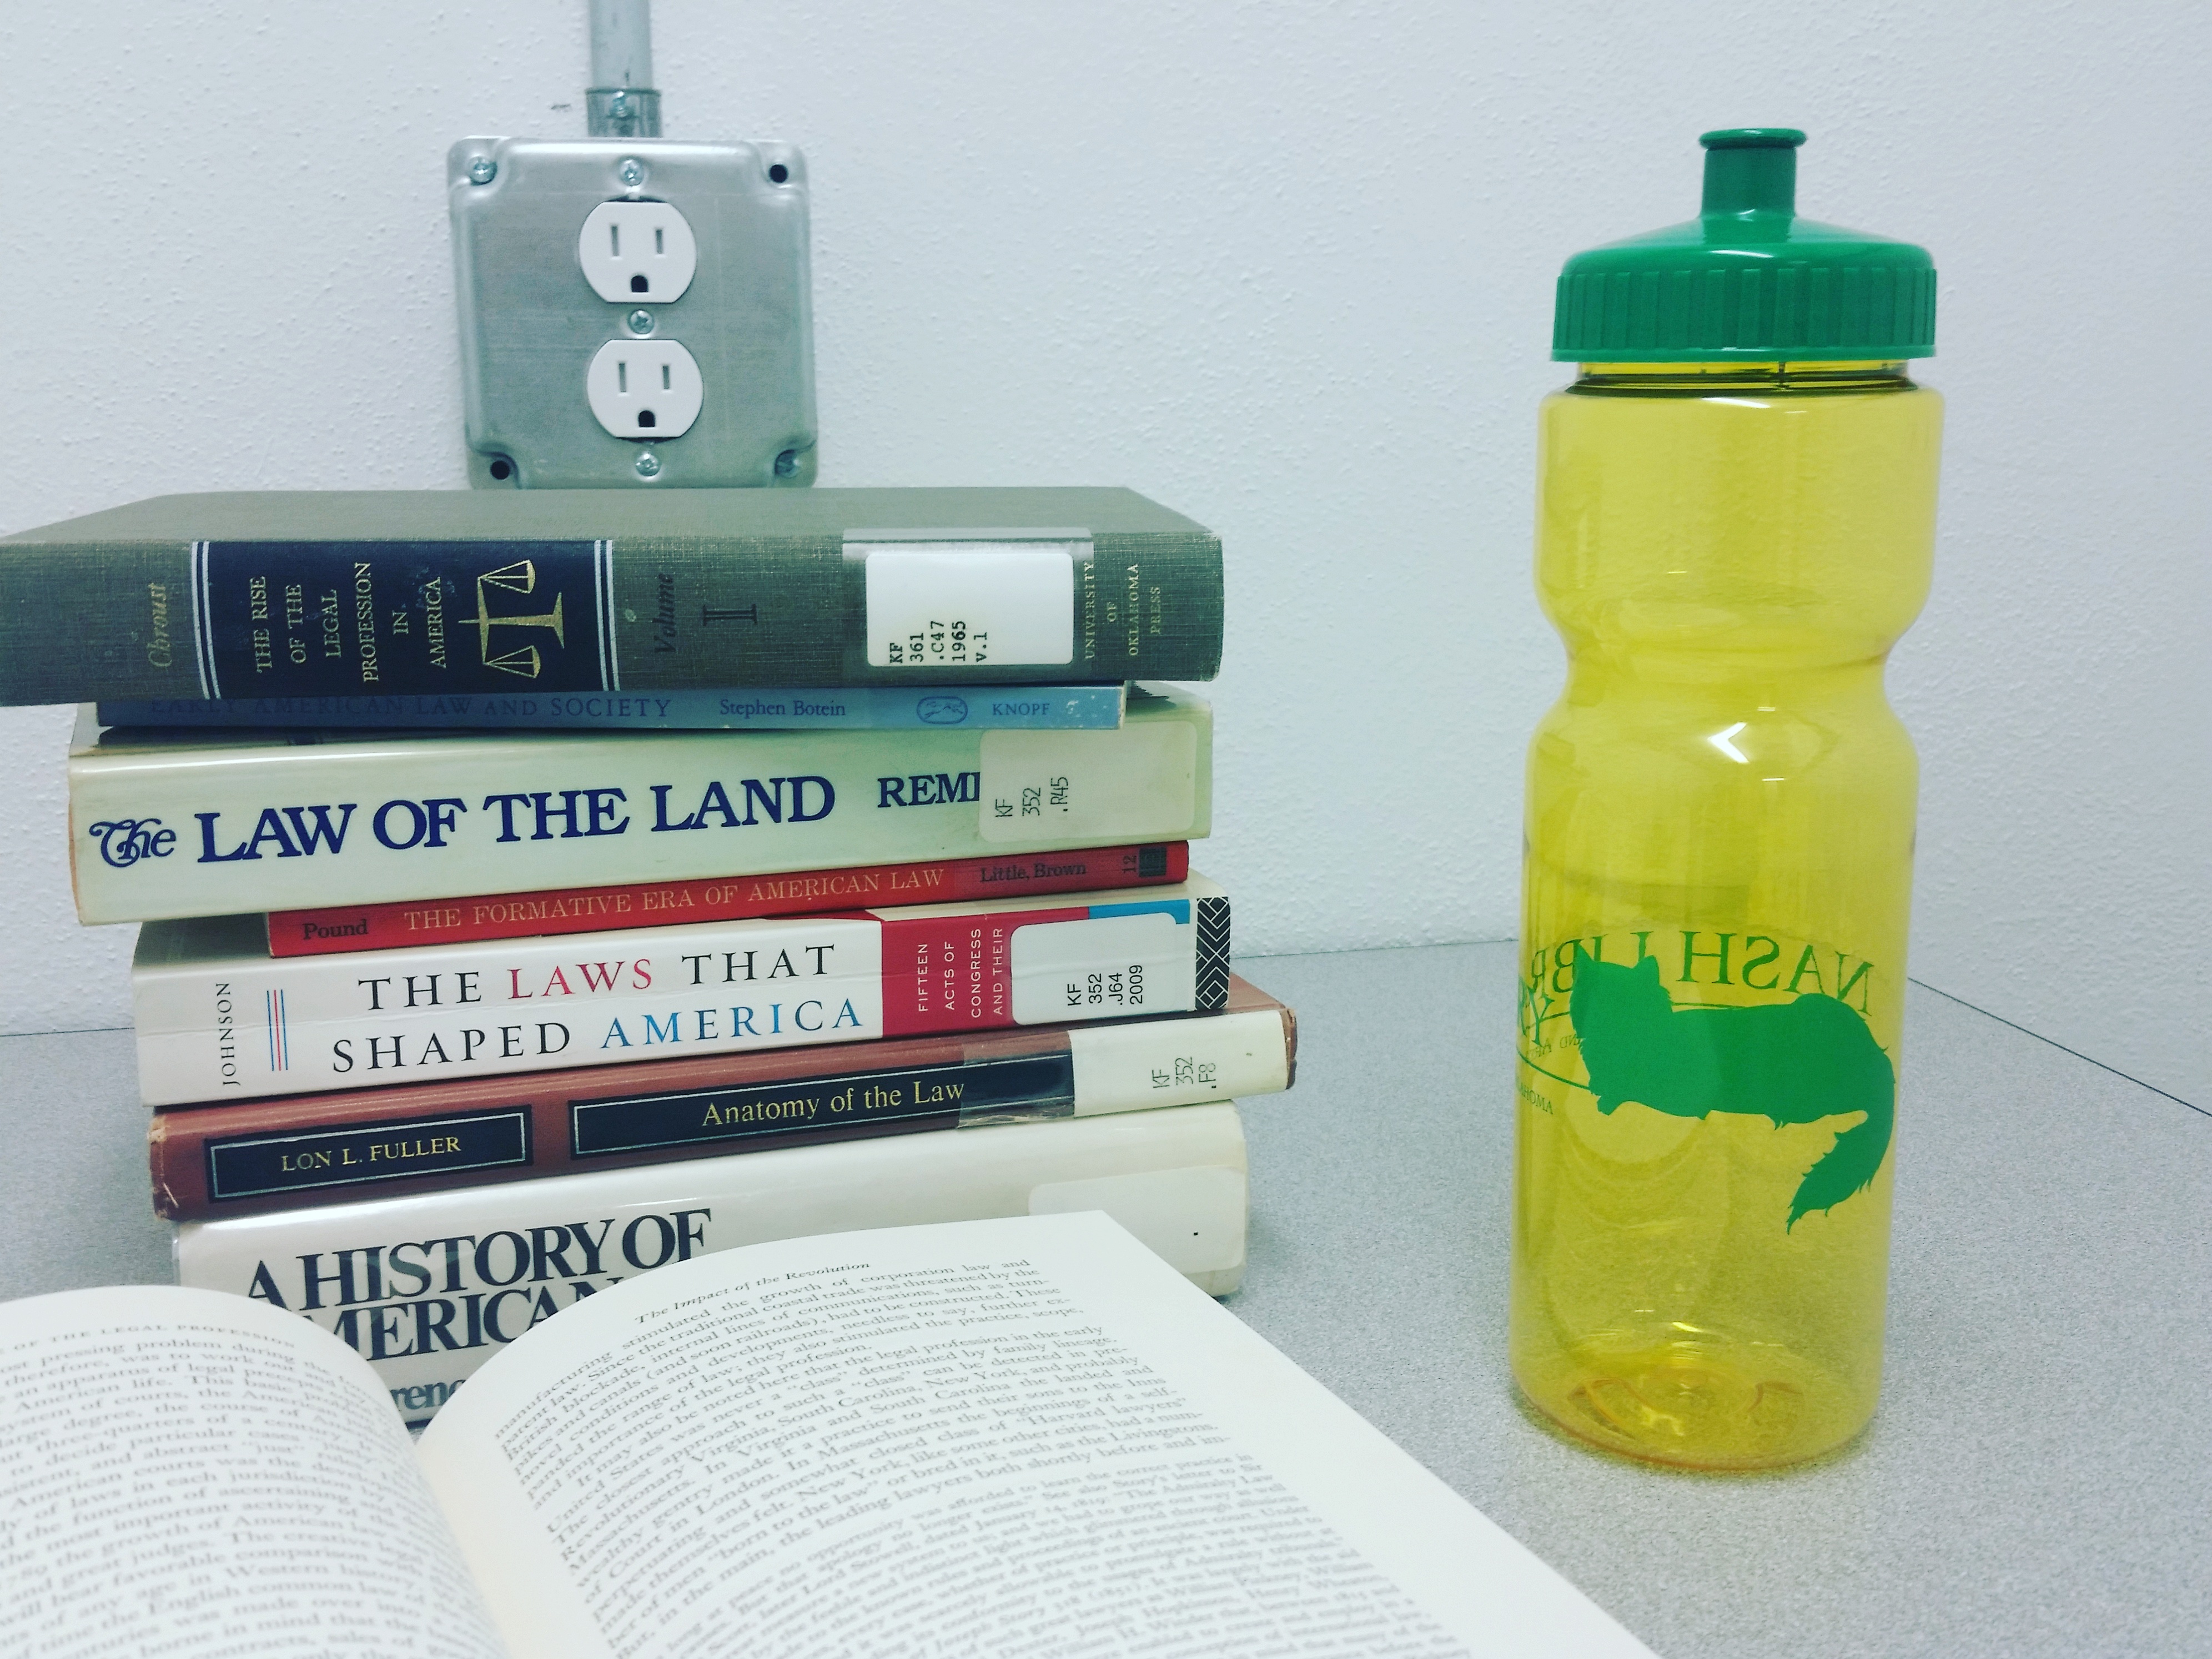 on a desk, yellow water bottle with a green lid next to stack of books. There is a cat logo on the water bottle.